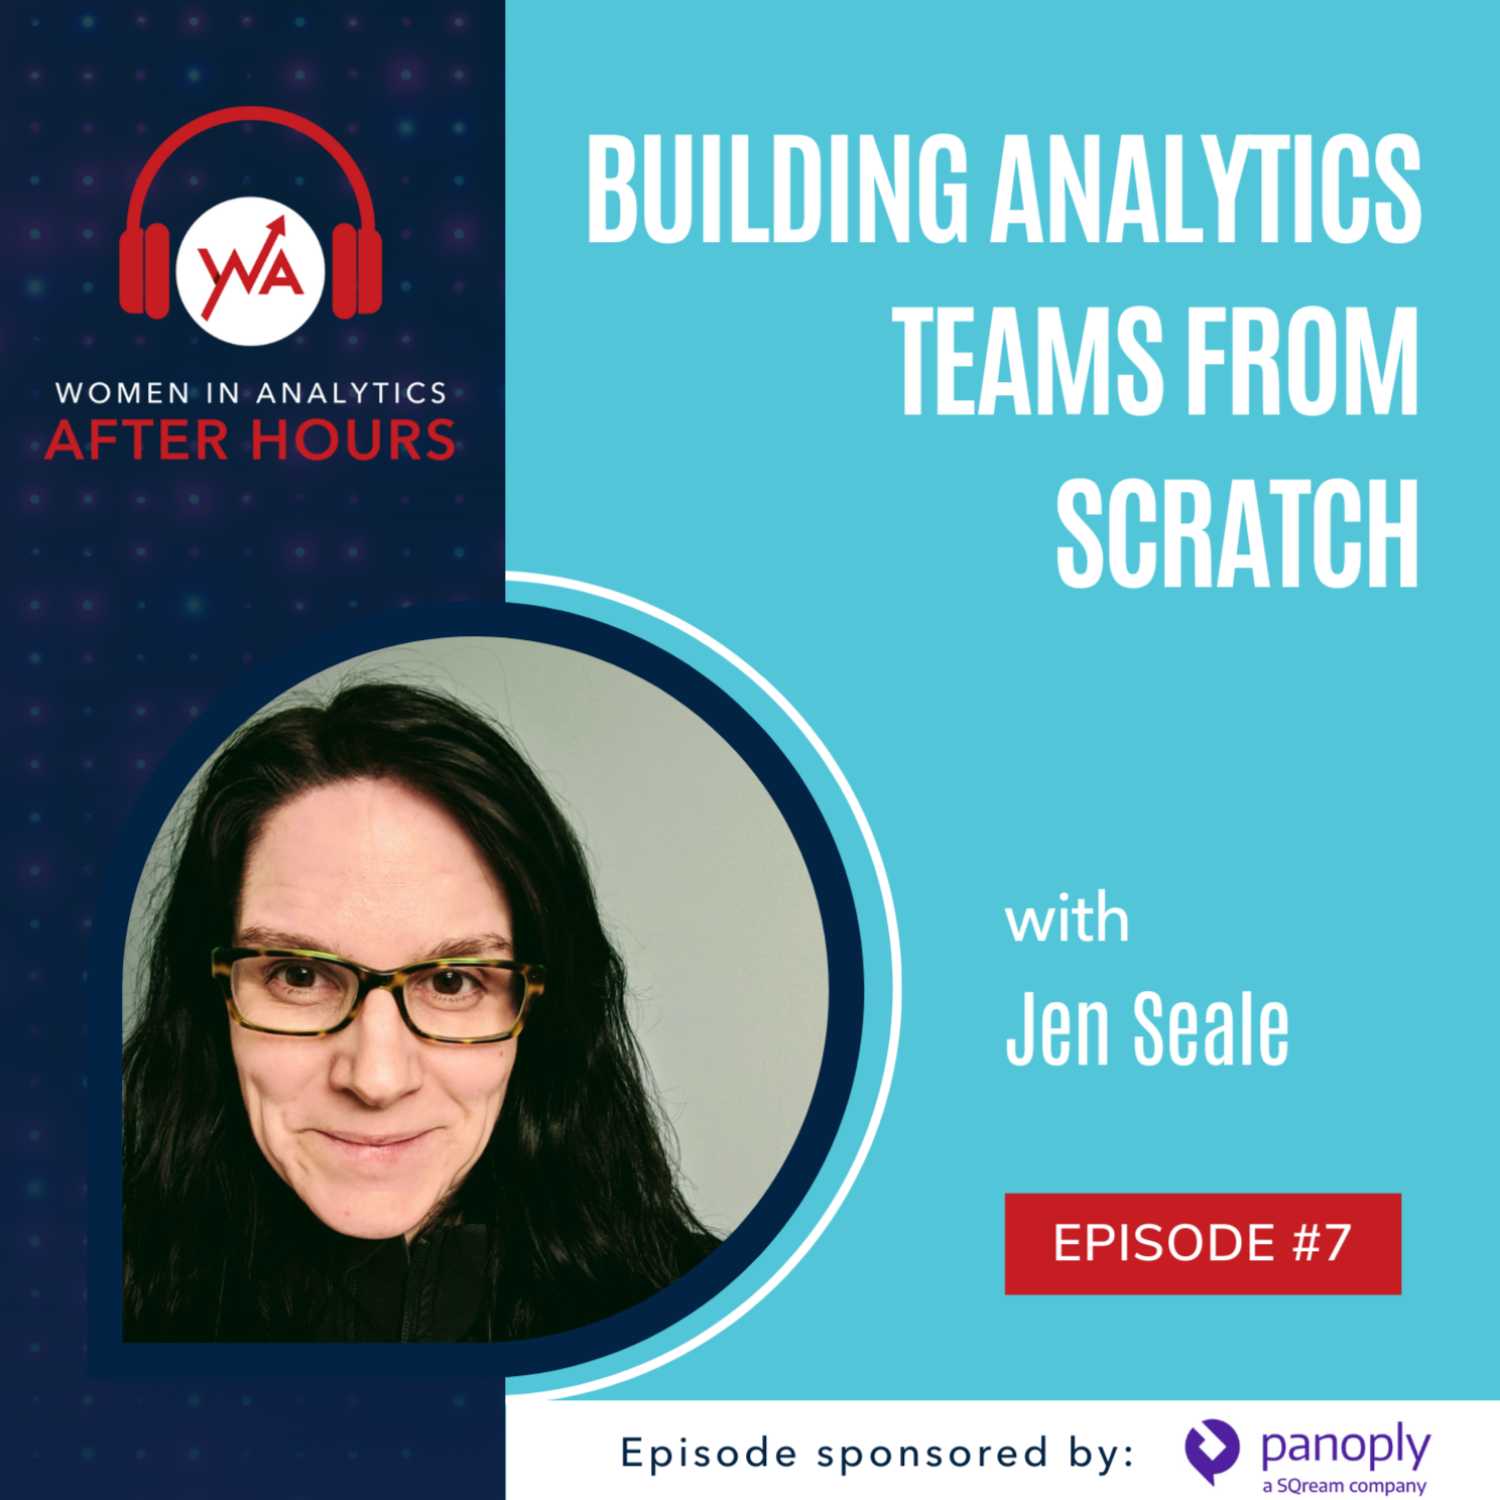 Episode 7 - Building Analytics Teams from Scratch with Jen Seale